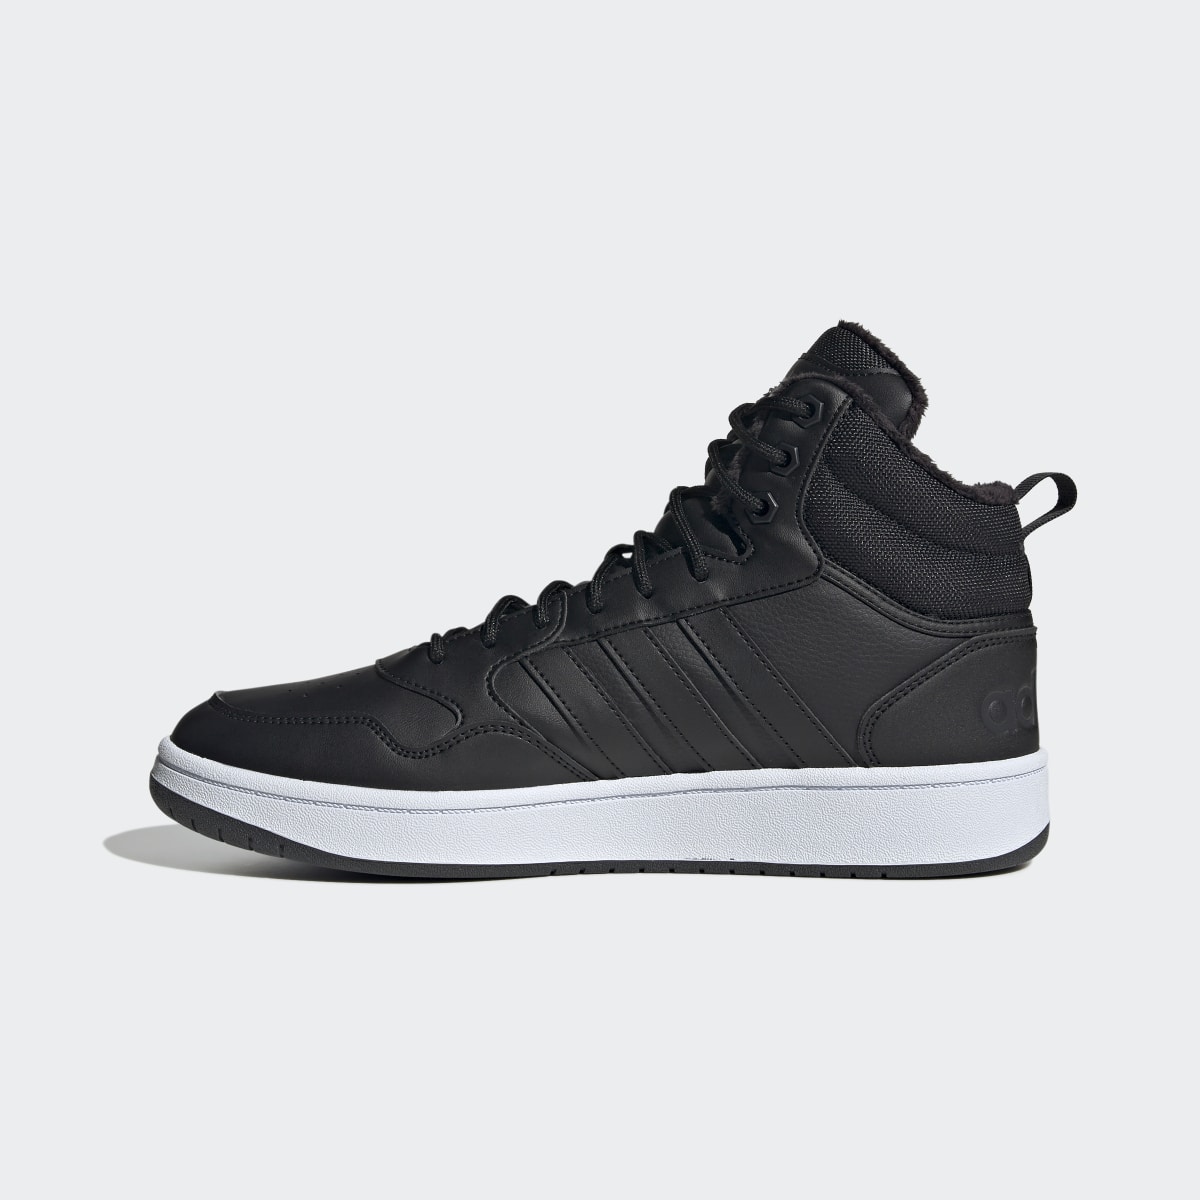 Adidas Hoops 3.0 Mid Classic Fur Lining Winterized Shoes. 7